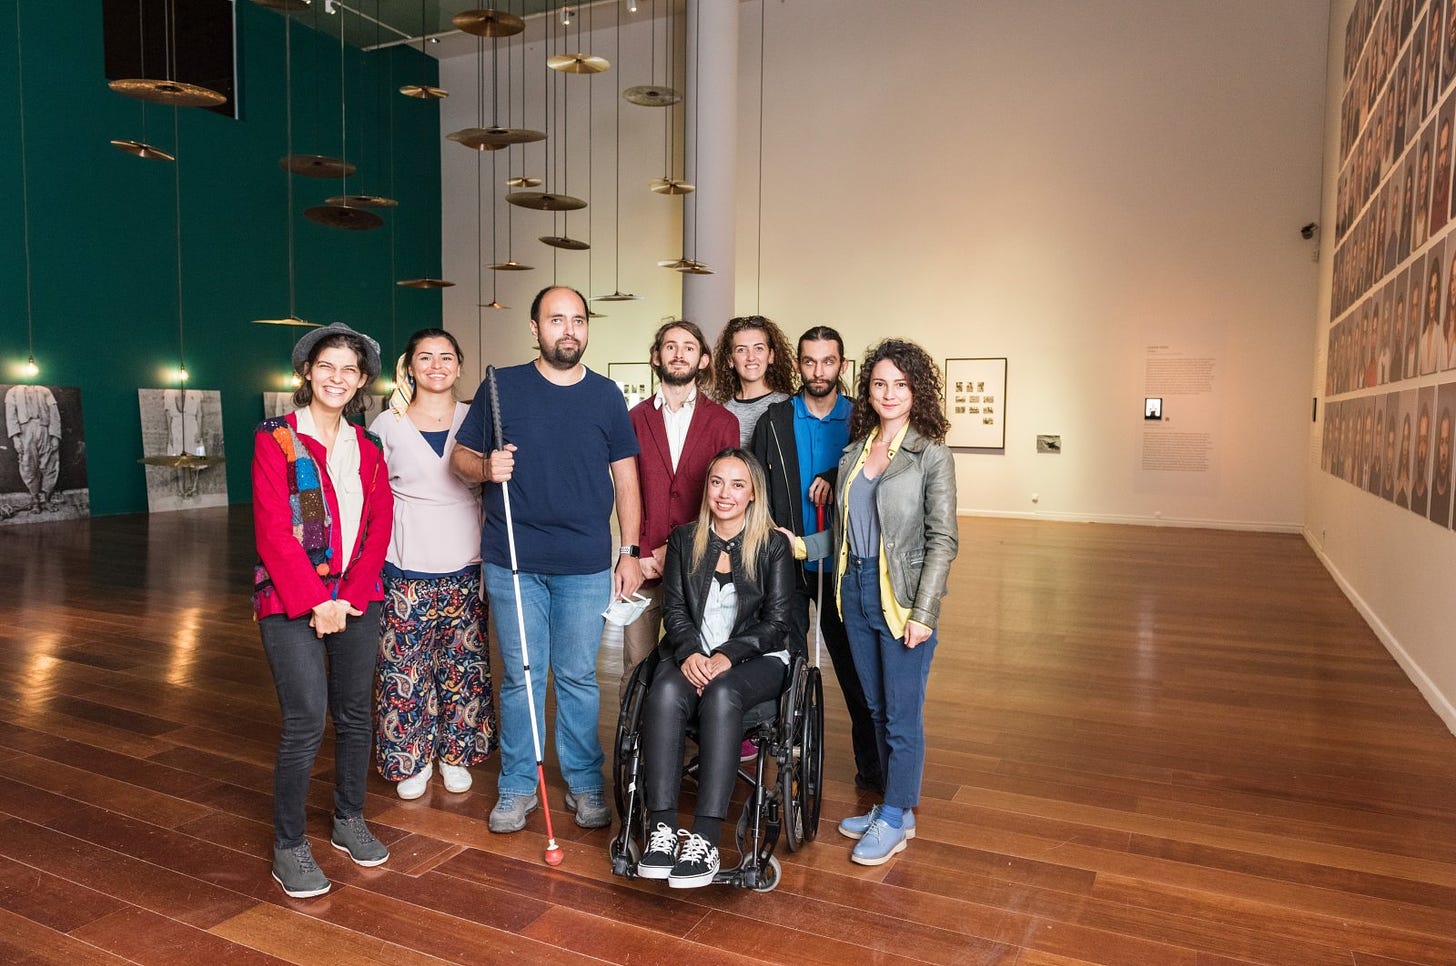 The team of Accessible Everything at the “Past, Present, Istanbul” exhibition at the Sakıp Sabancı Museum, Istanbul, Türkiye. (Photo courtesy of Accessible Everything)